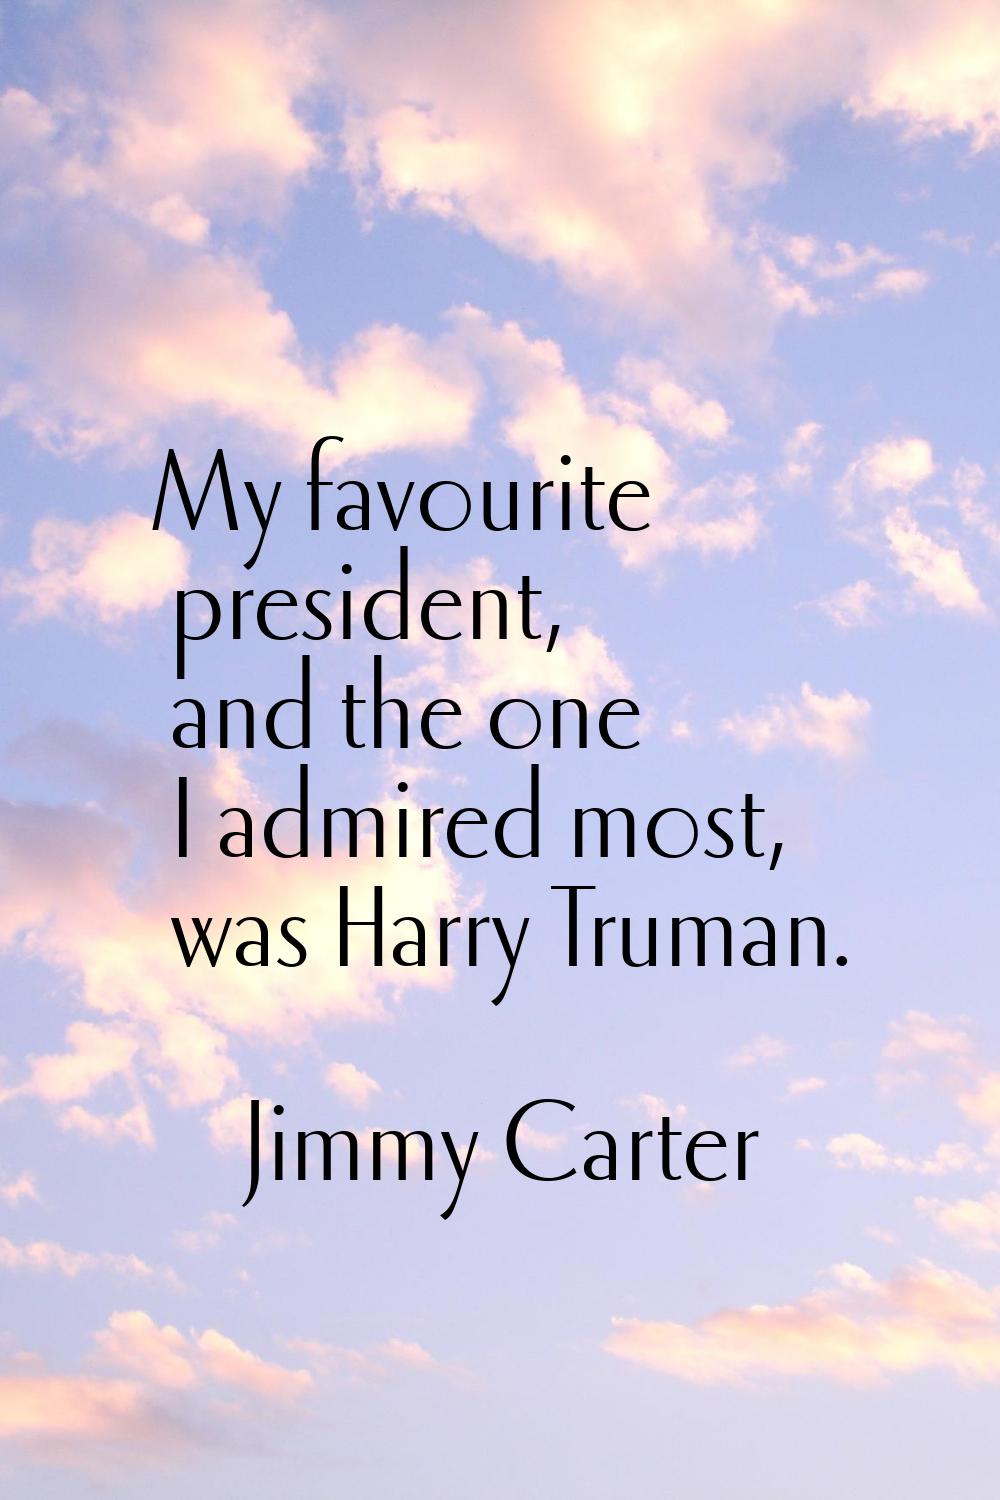 My favourite president, and the one I admired most, was Harry Truman.